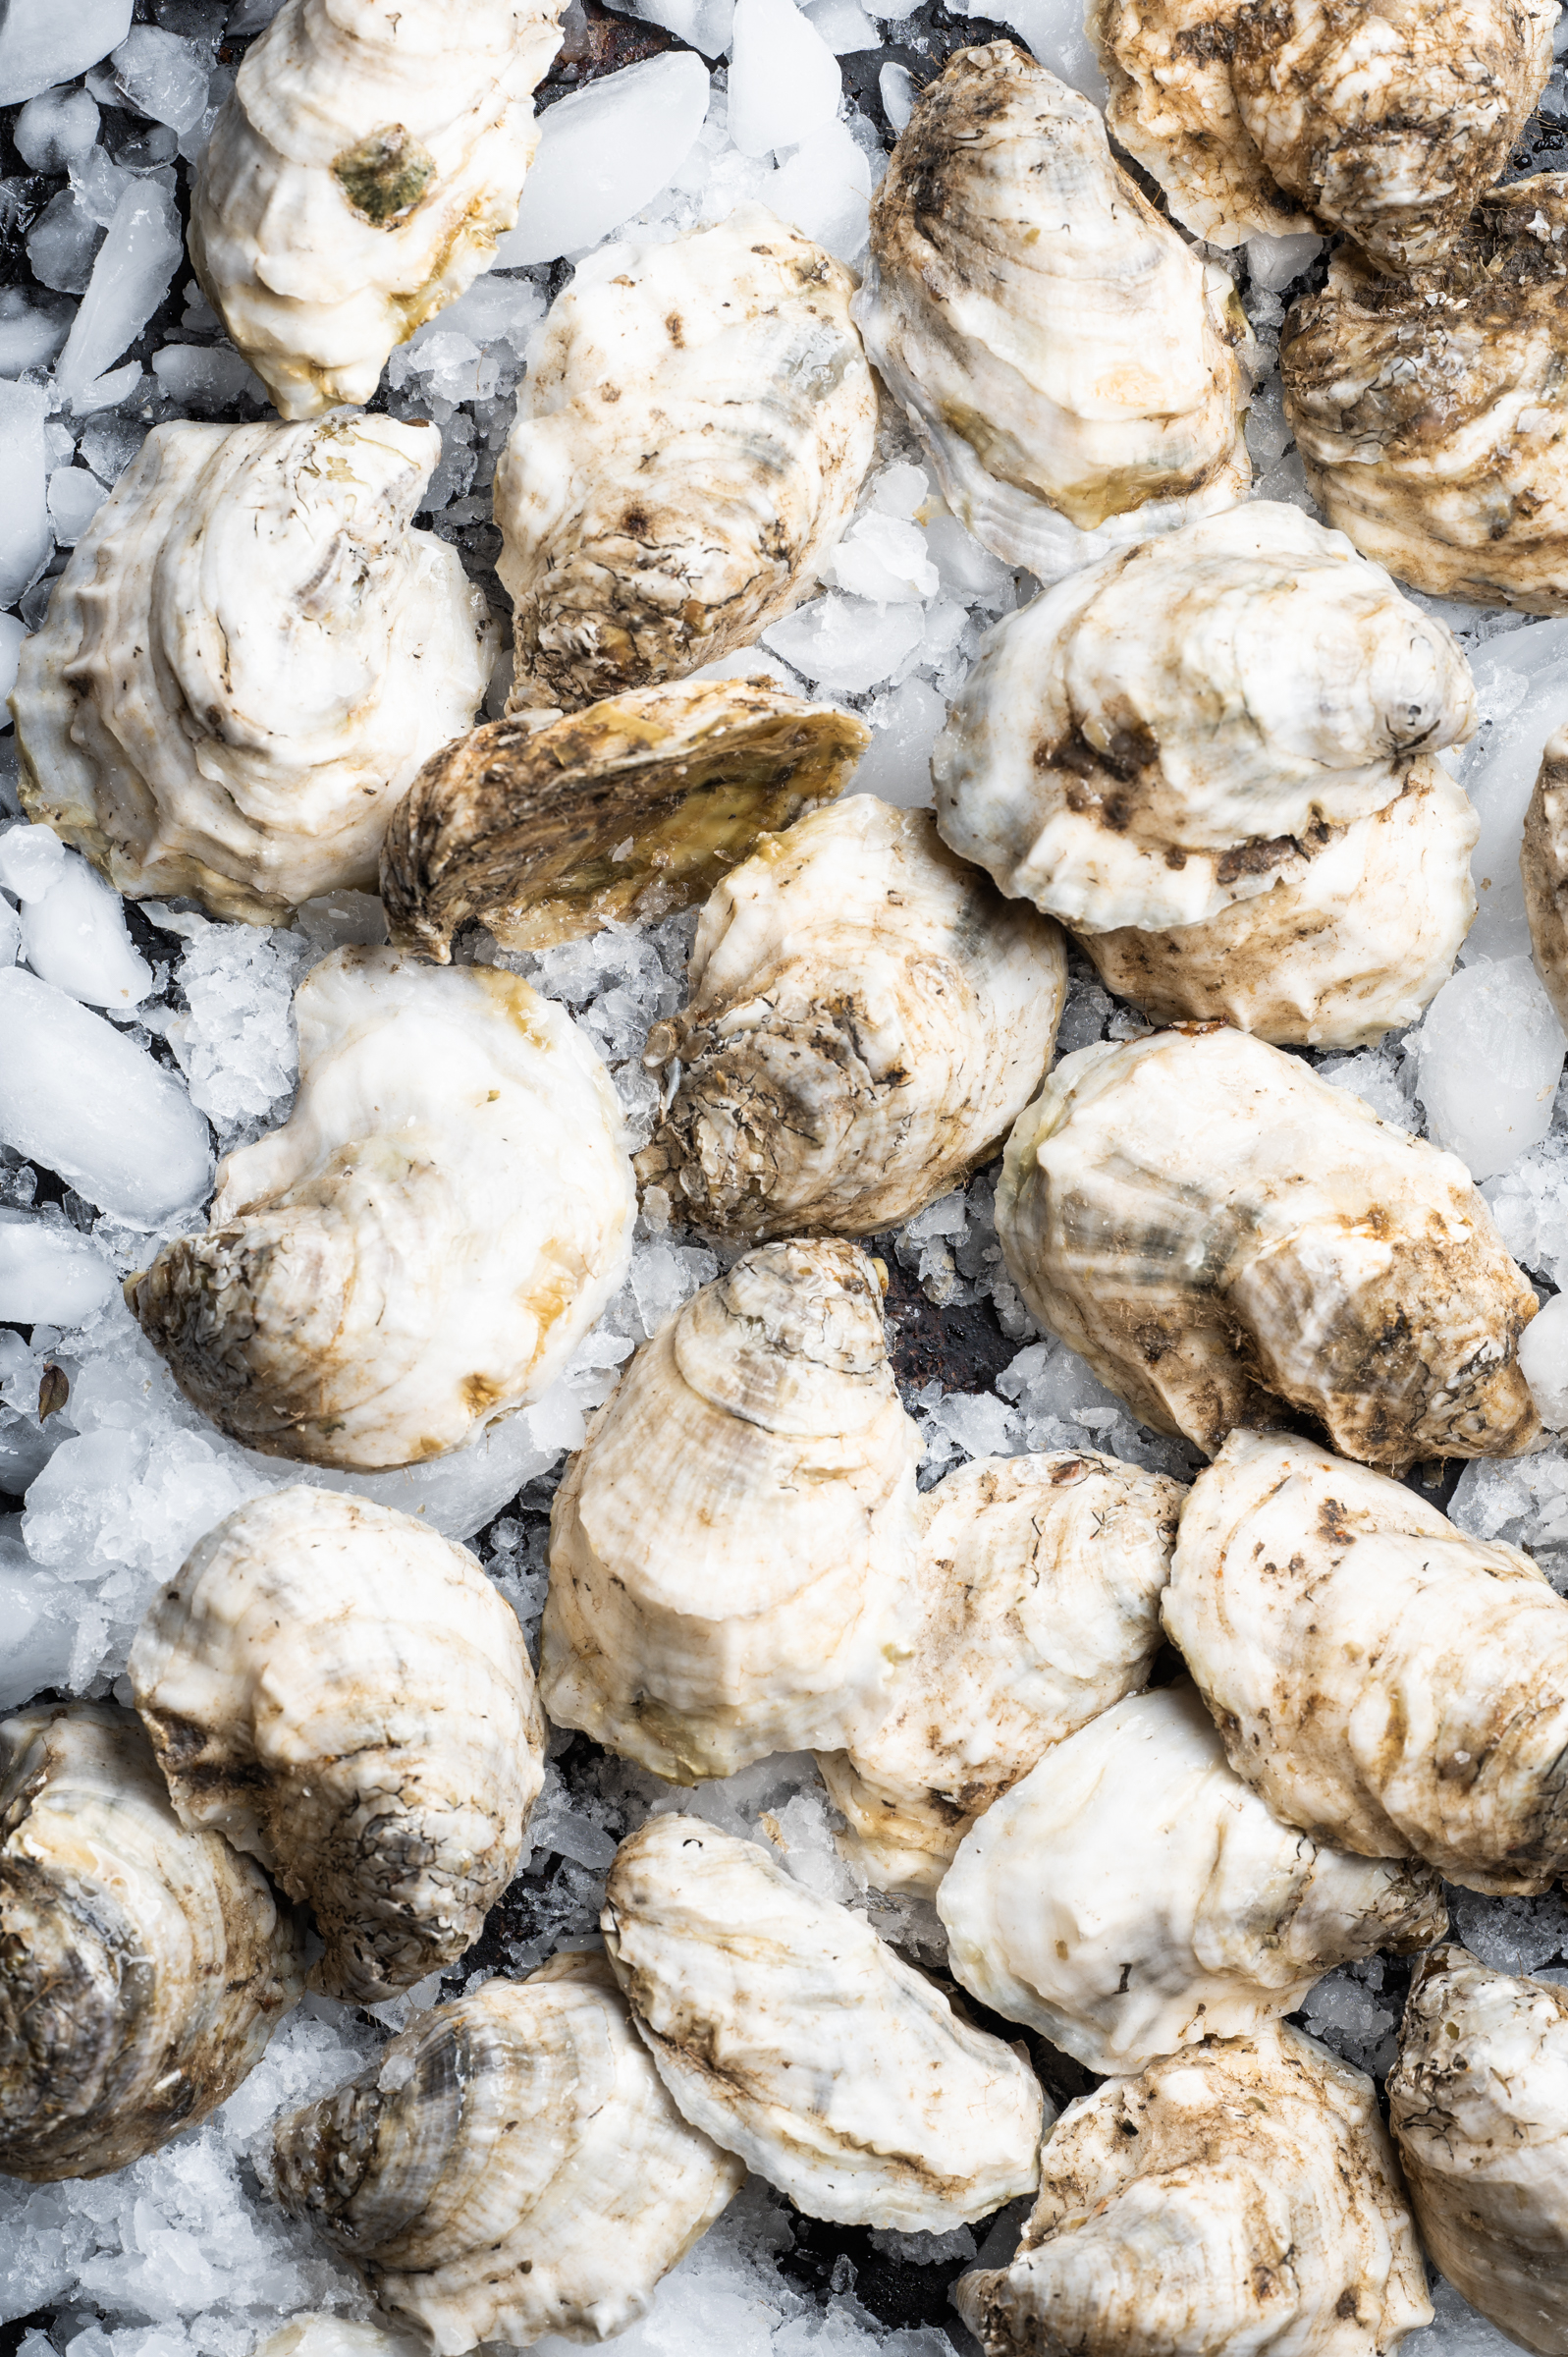 Fresh oysters on a bed of ice